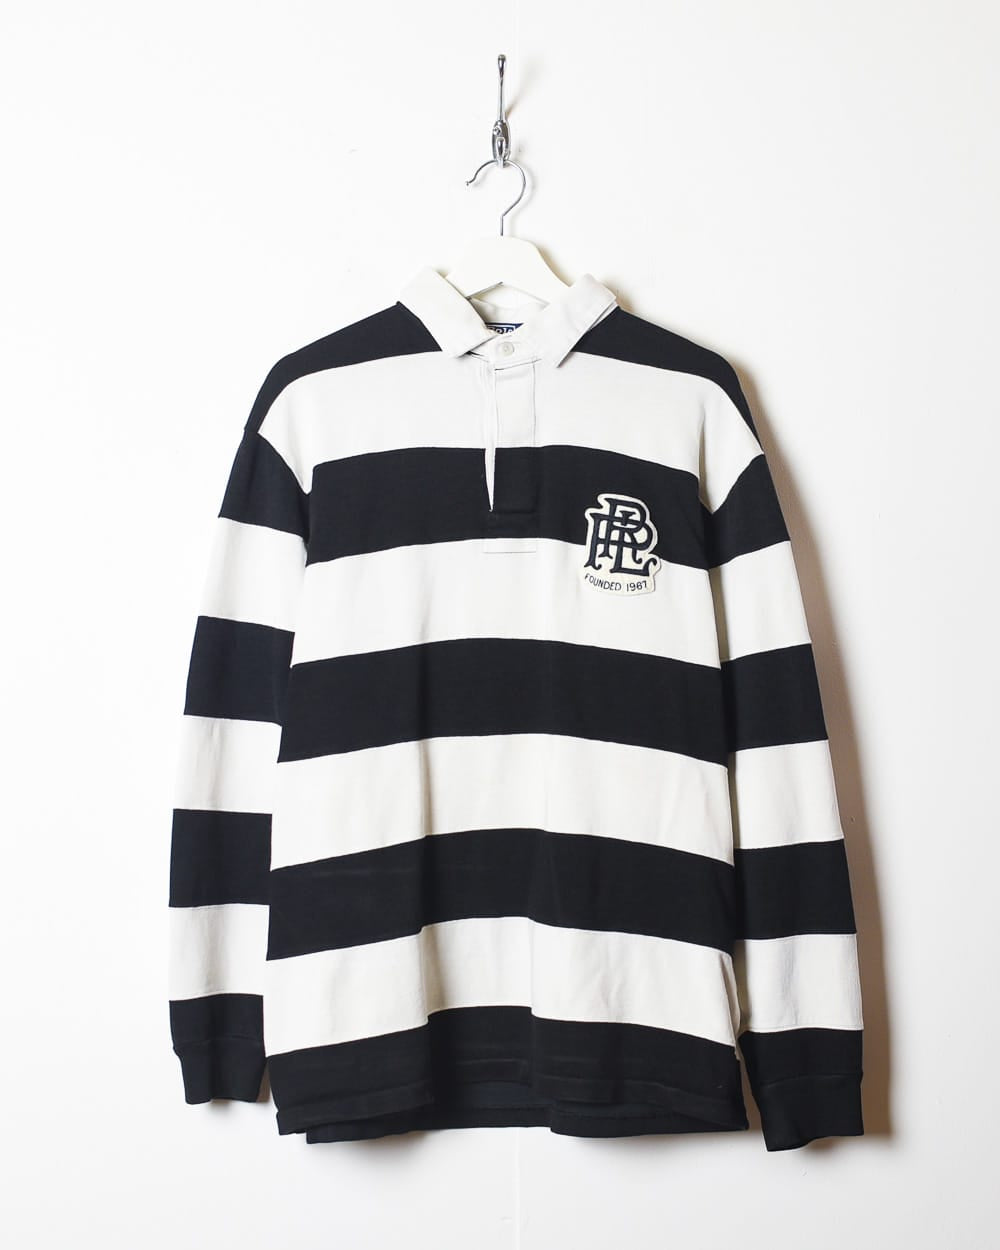 White Polo Ralph Lauren Striped Rugby Shirt - Large